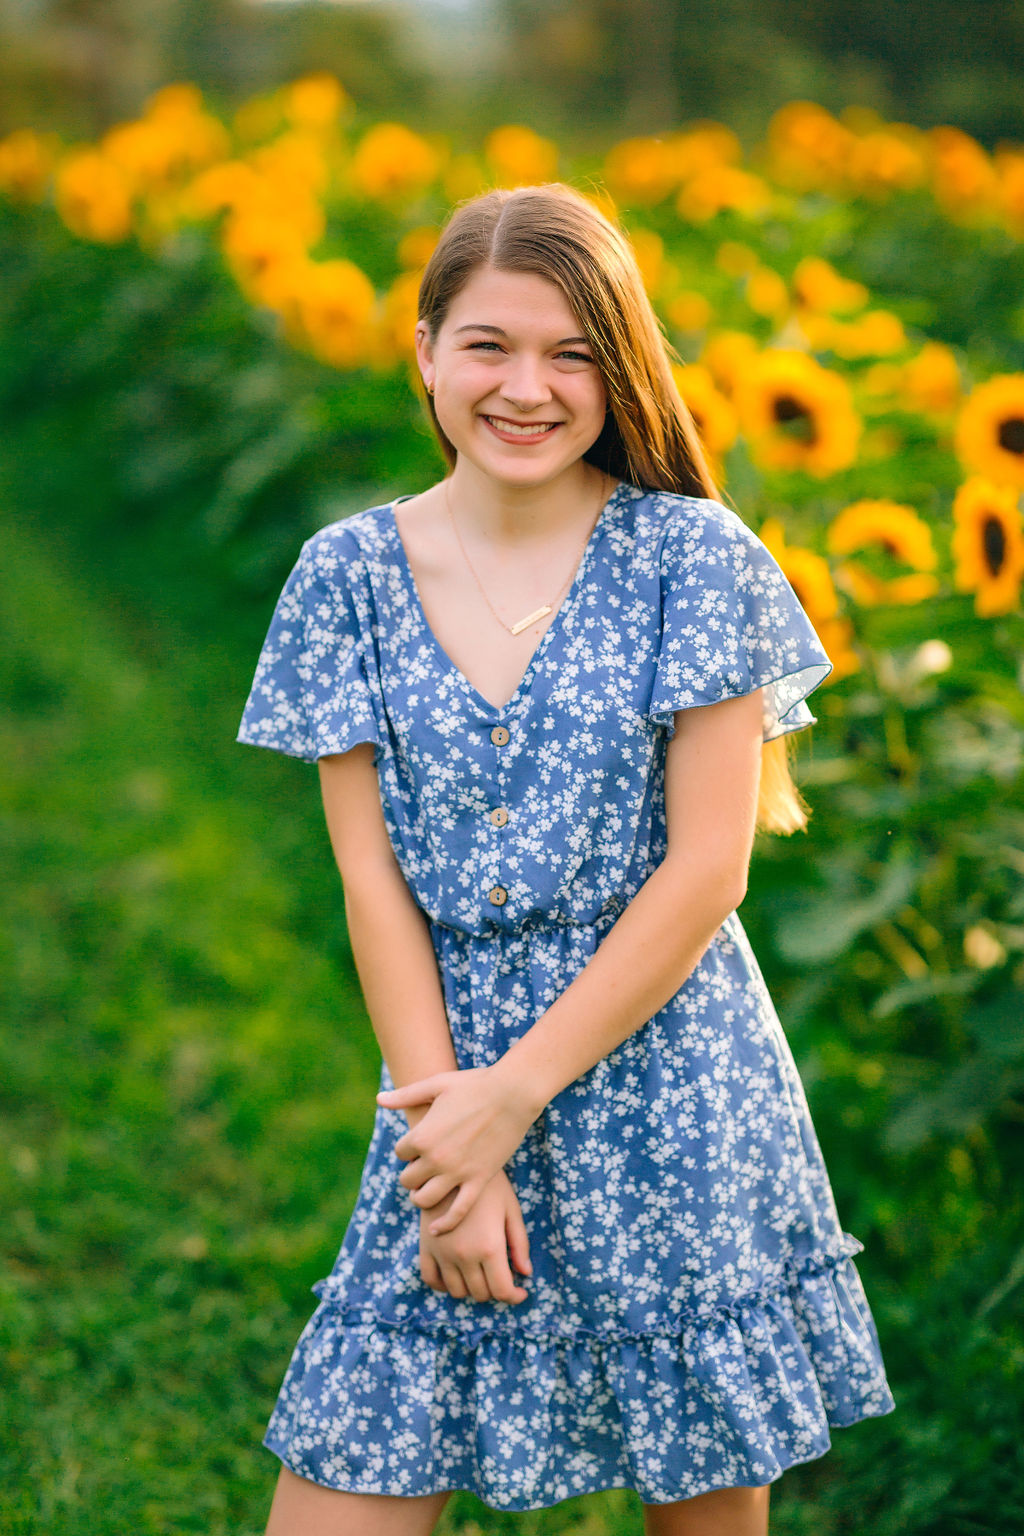 A young girl stands in a field of sunflowers wearing a blue and white dress rocktown dental